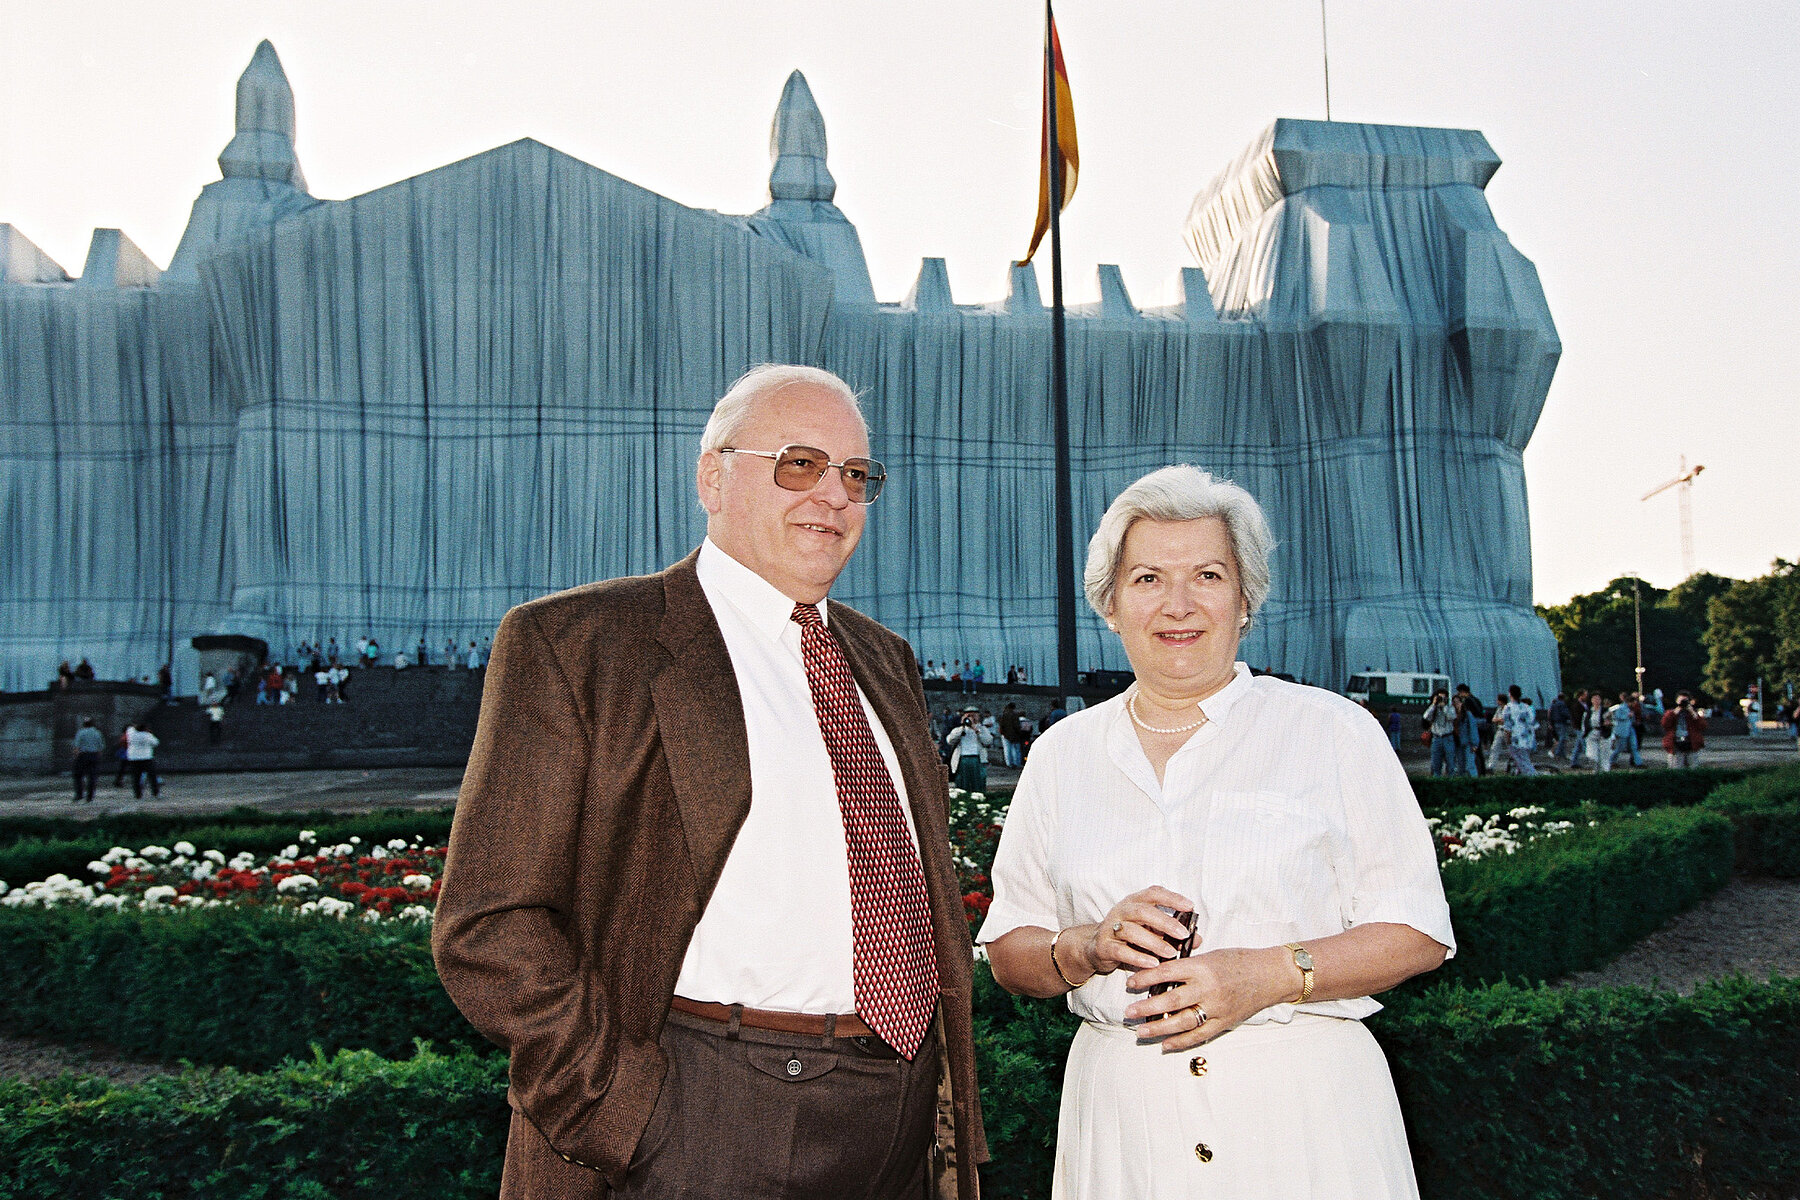 Roman and Christiane Herzog stand in front of Reichstag building which is covered in white.